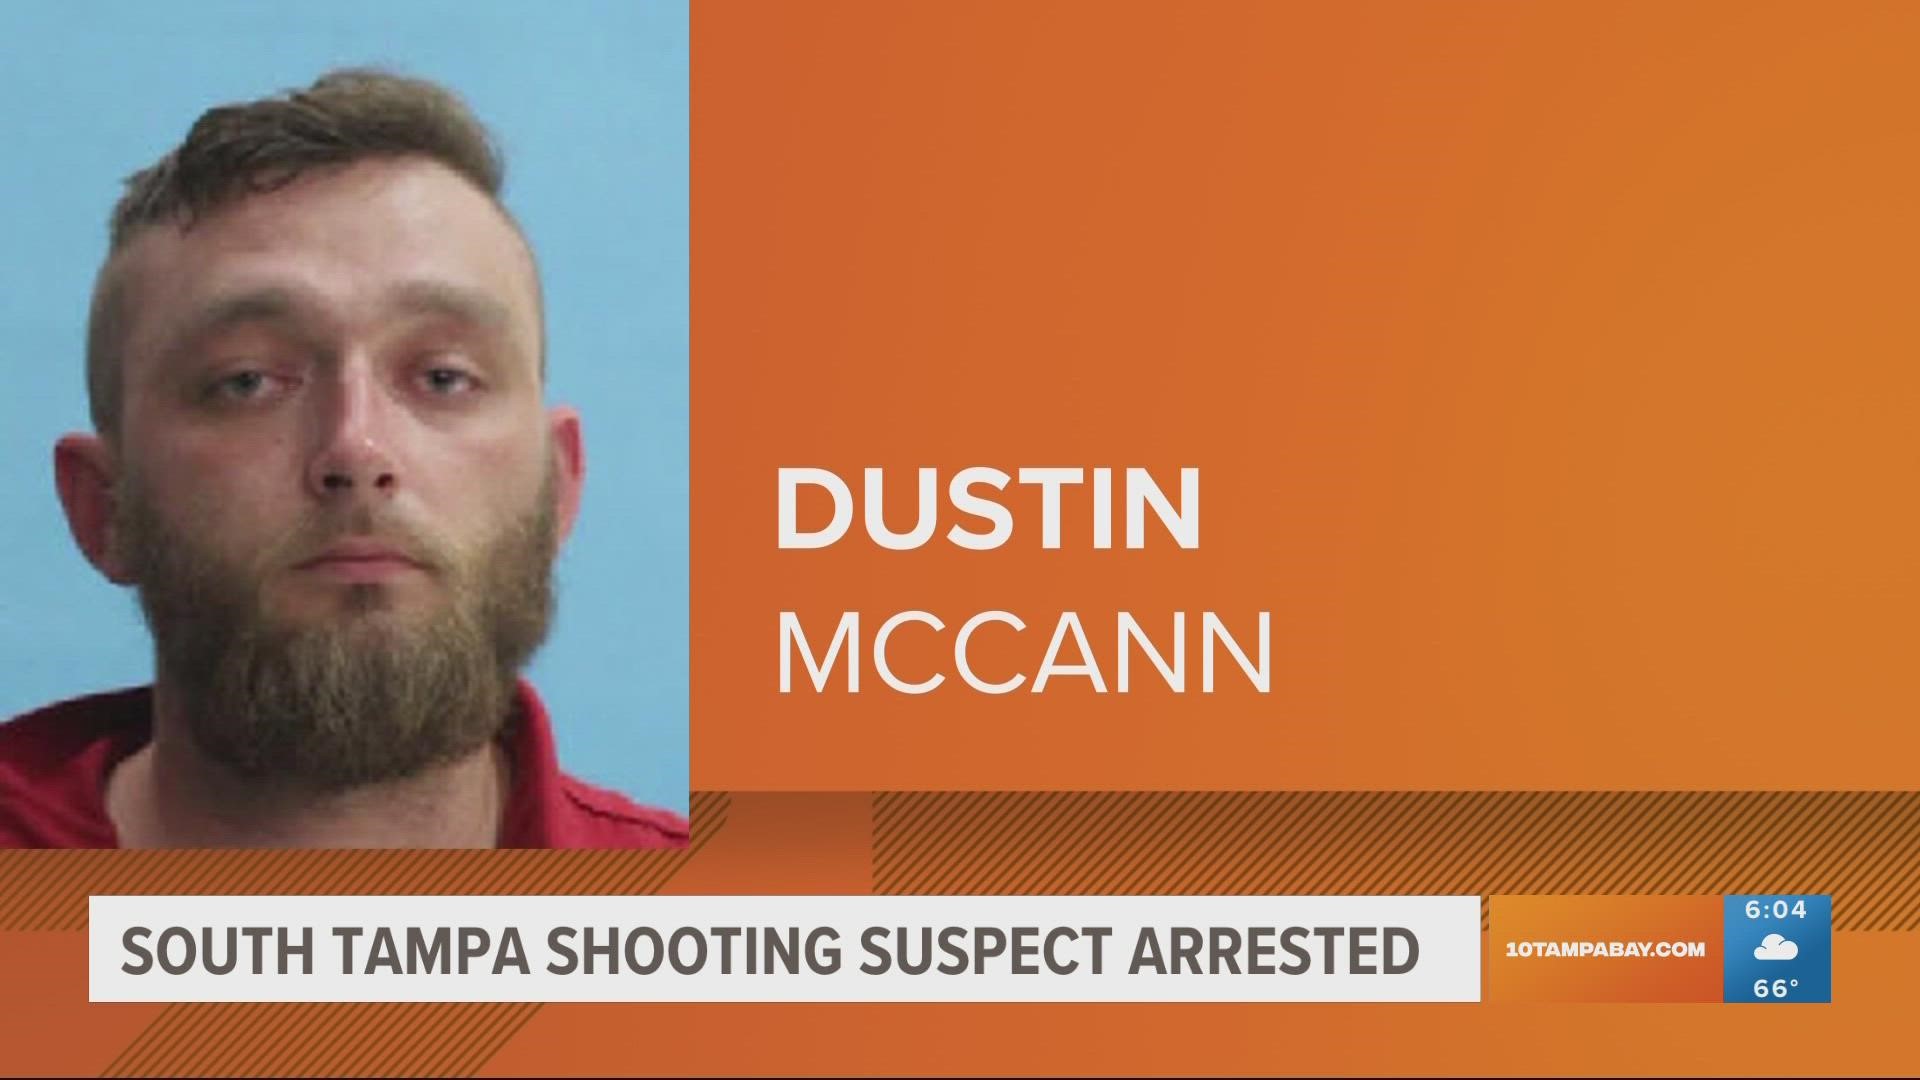 Police said Dustin McCann was removed from the bar after he repeatedly used the "n-word" toward a Black security guard.